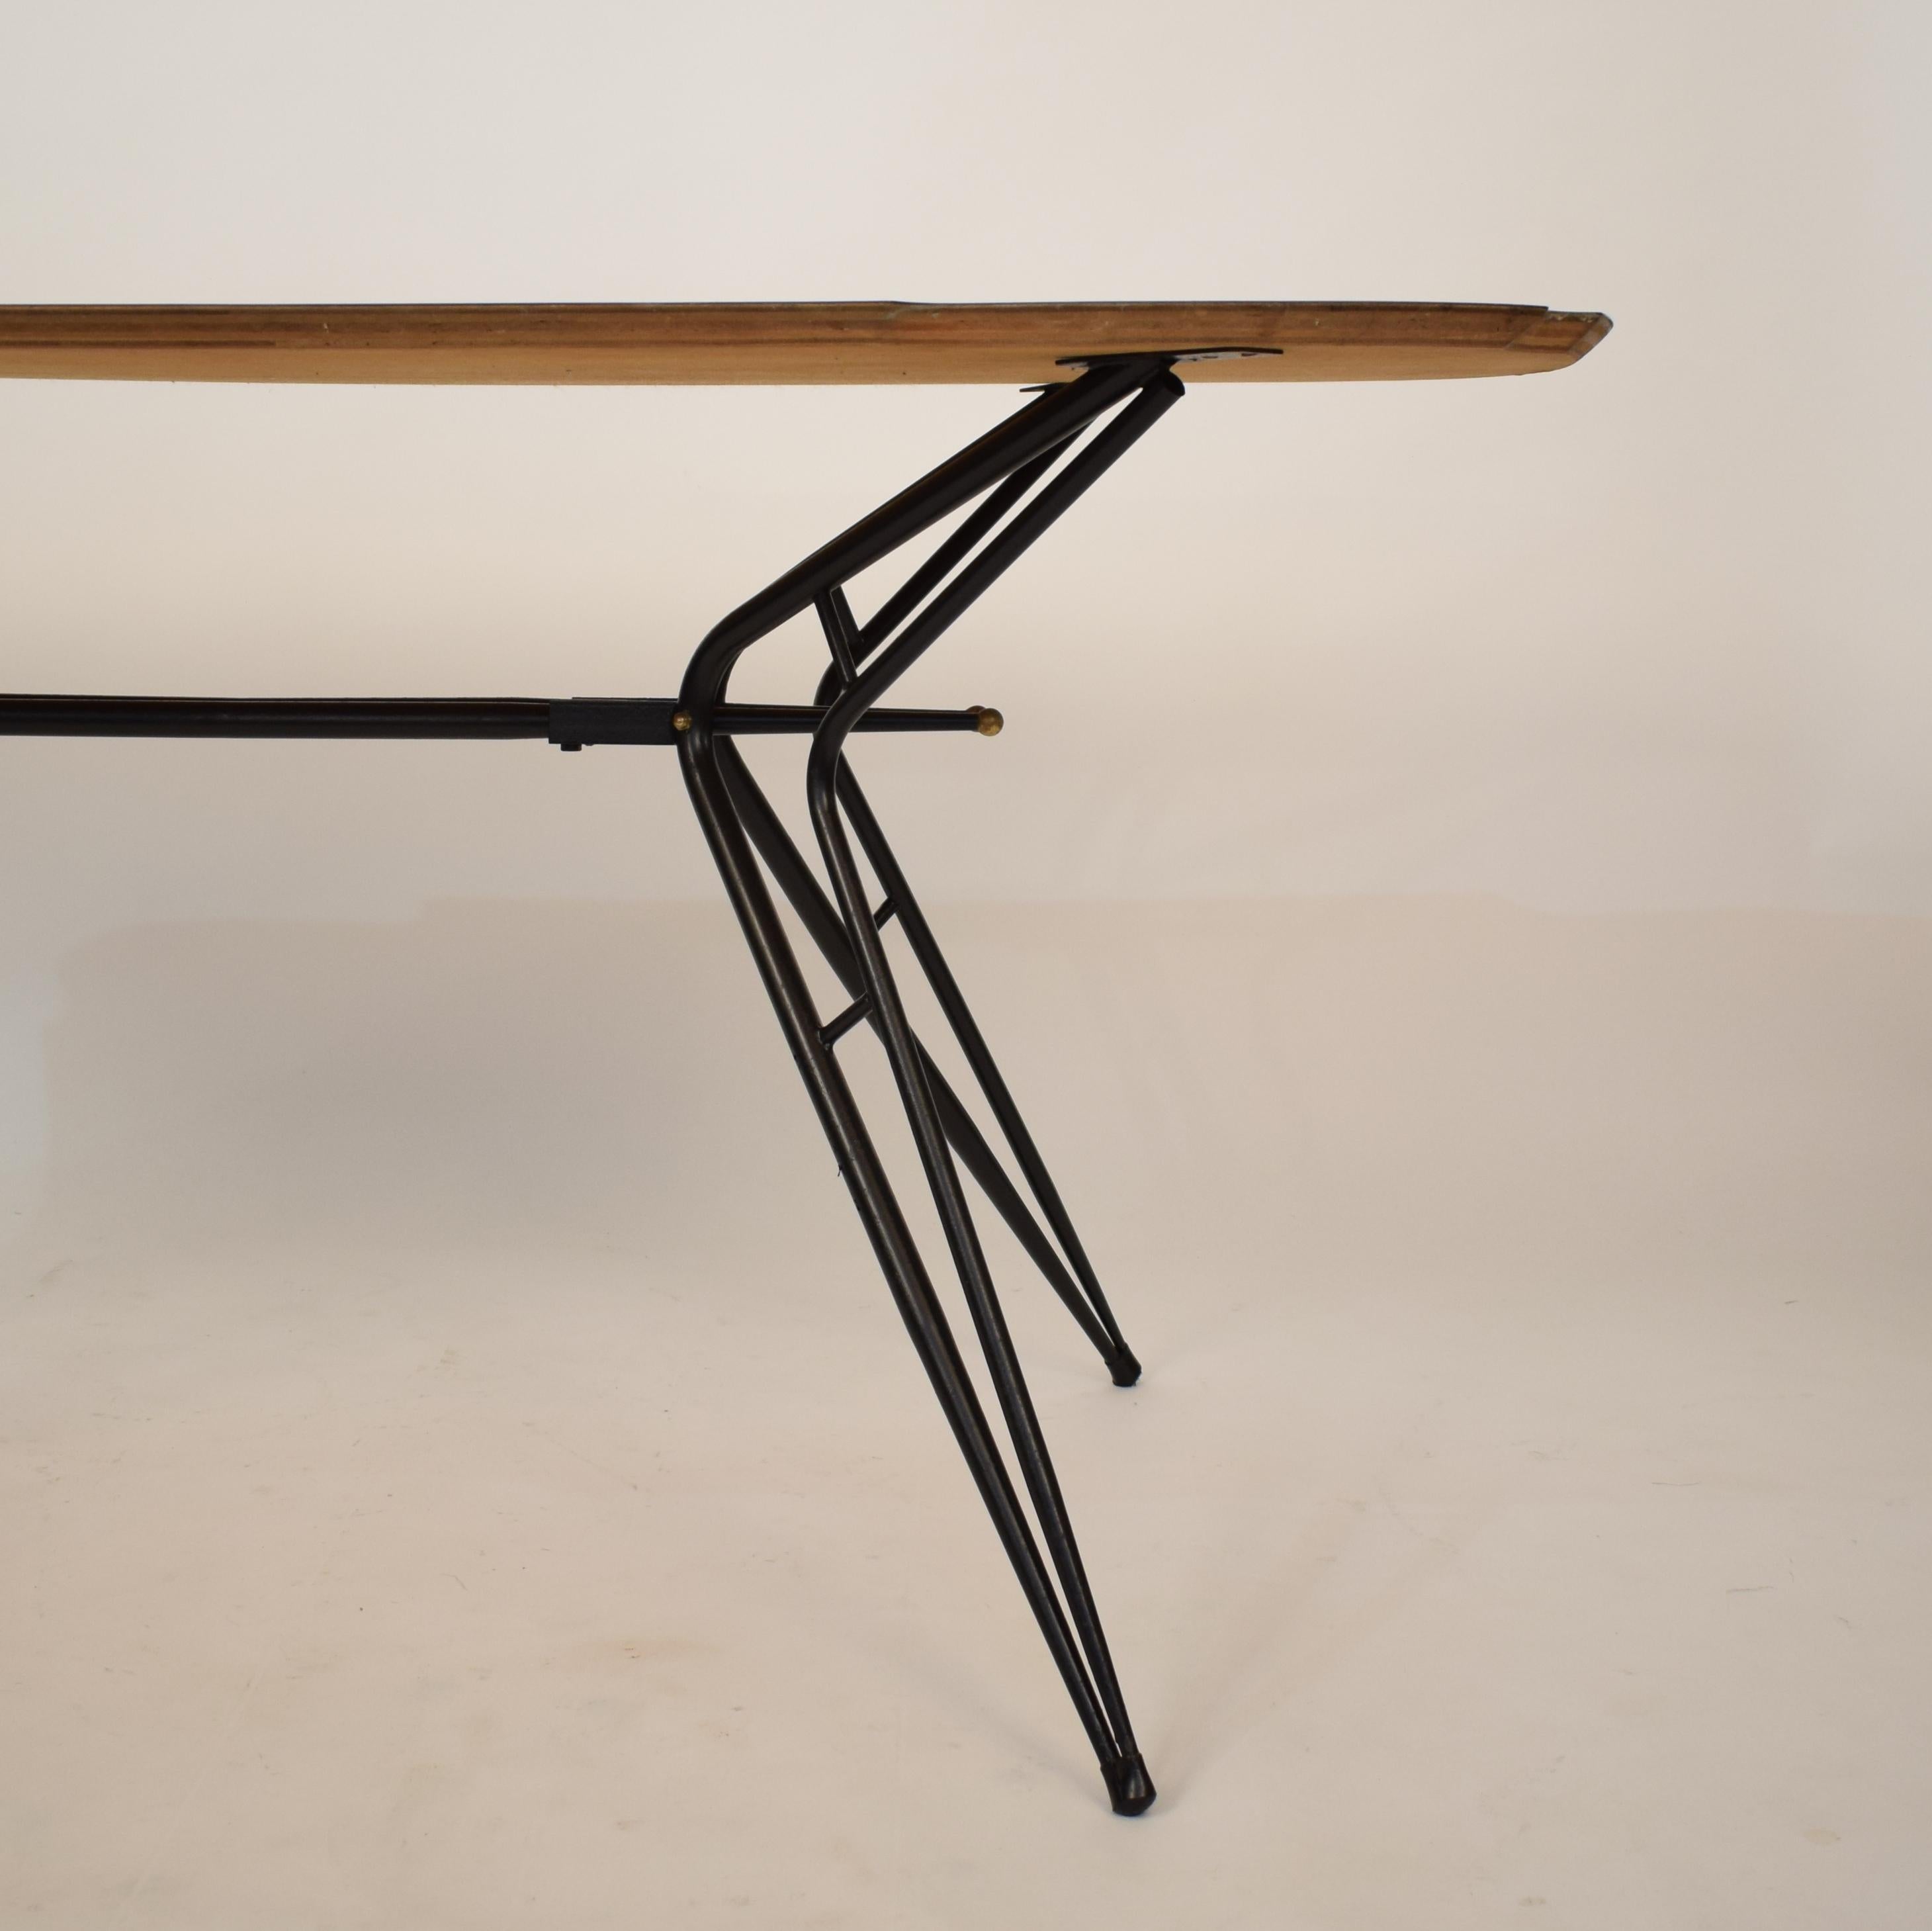 Mid-20th Century Midcentury Italian Black and White Dining Table Attributed to Ico Parisi, 1958 For Sale